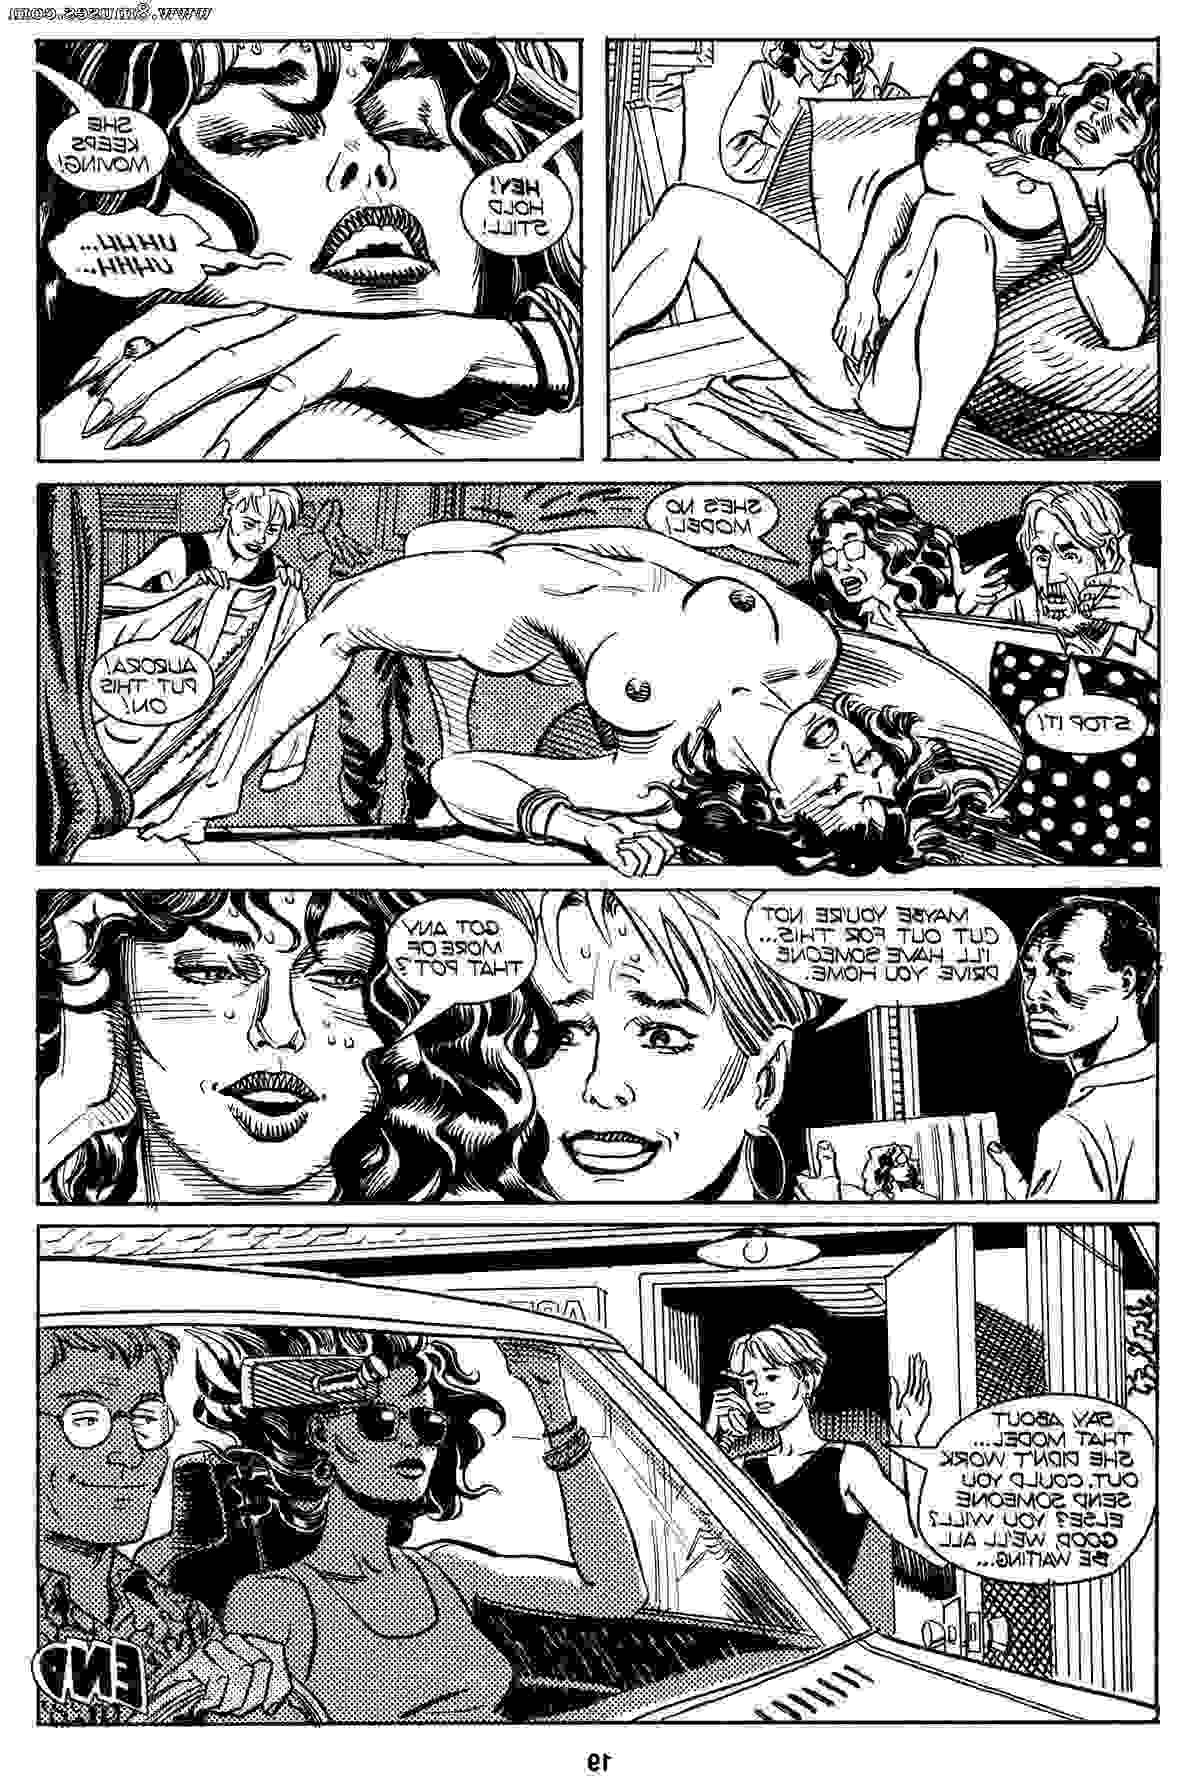 EROS-Comics/Real-Smut Real_Smut__8muses_-_Sex_and_Porn_Comics_21.jpg